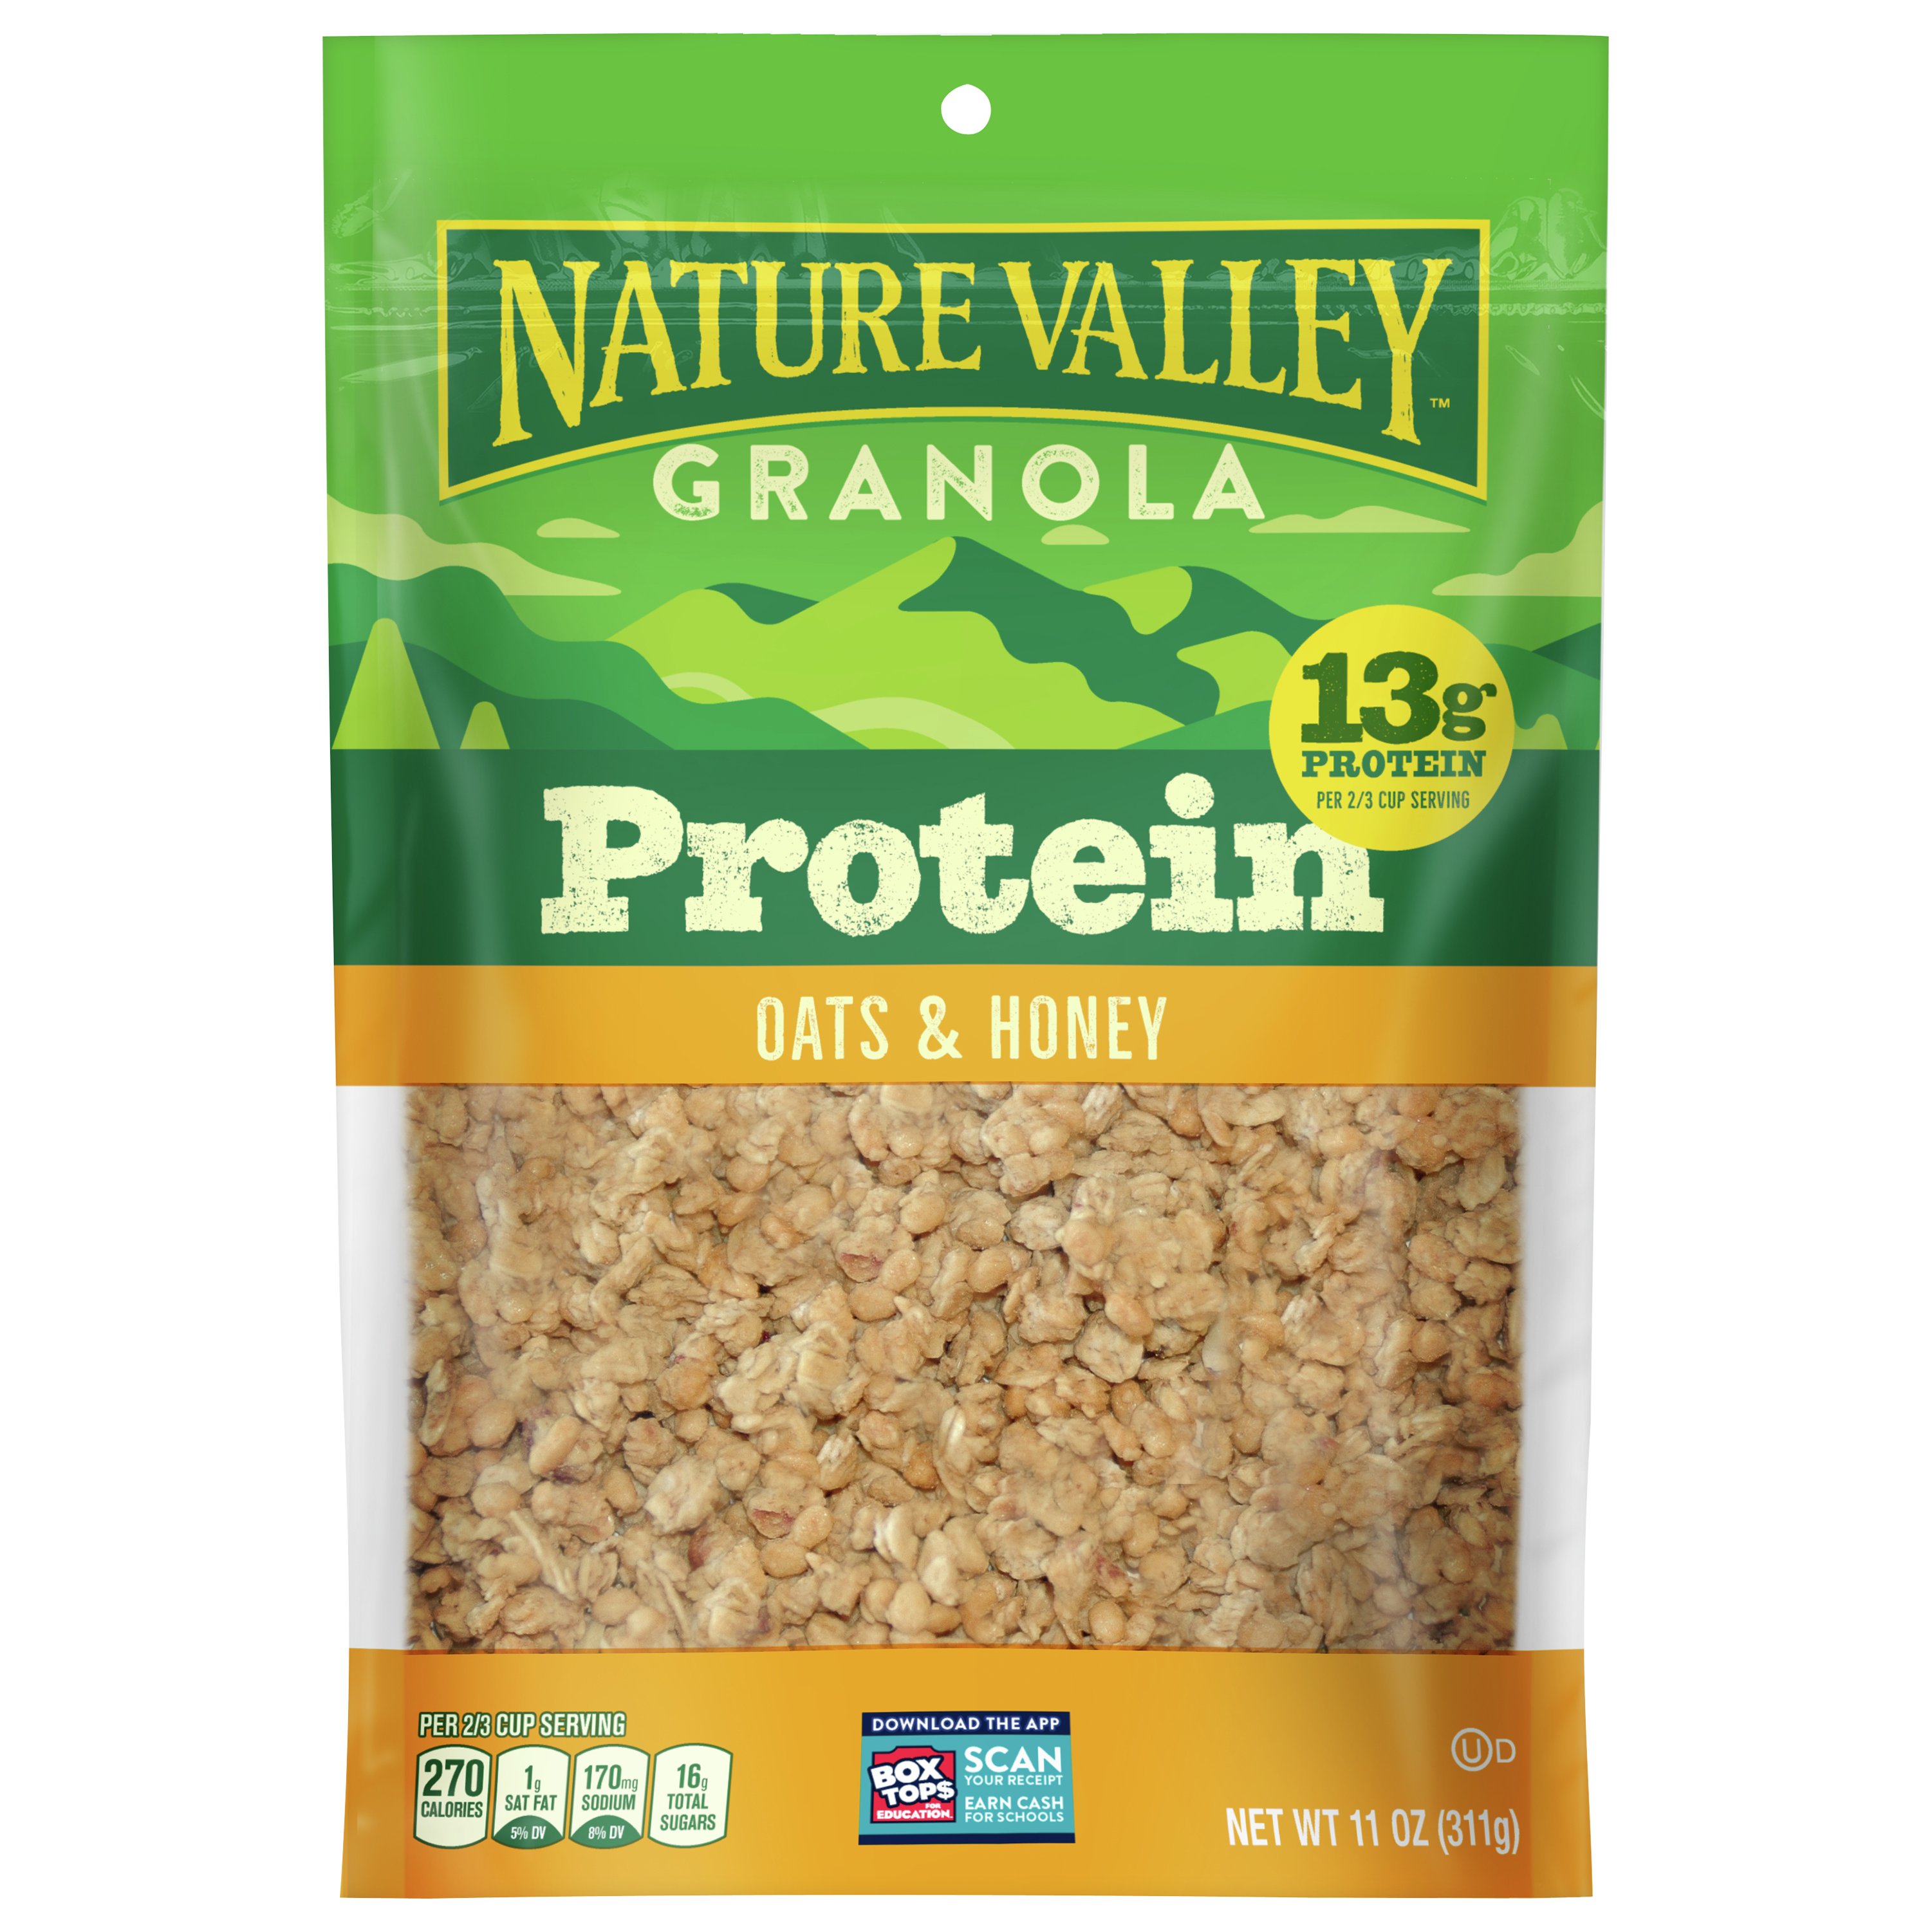 Nature Valley Oats N Honey Protein Crunchy Granola Shop Cereal At H E B